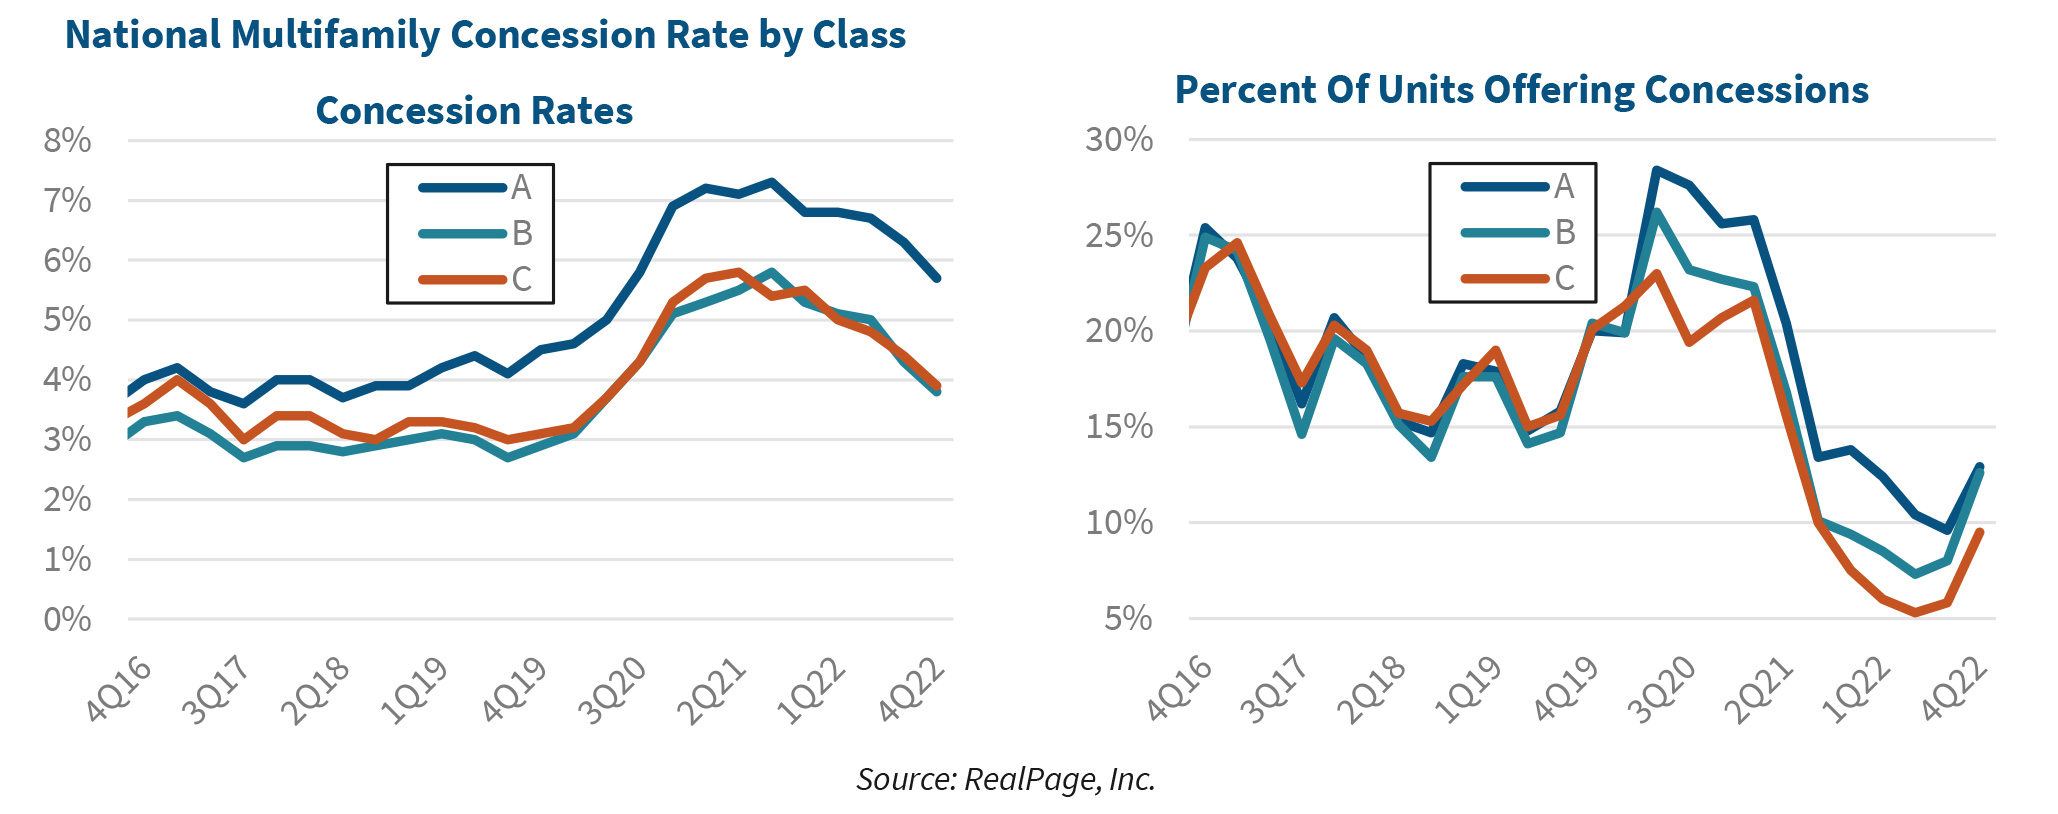 National Multifamily Concession Rate by Class